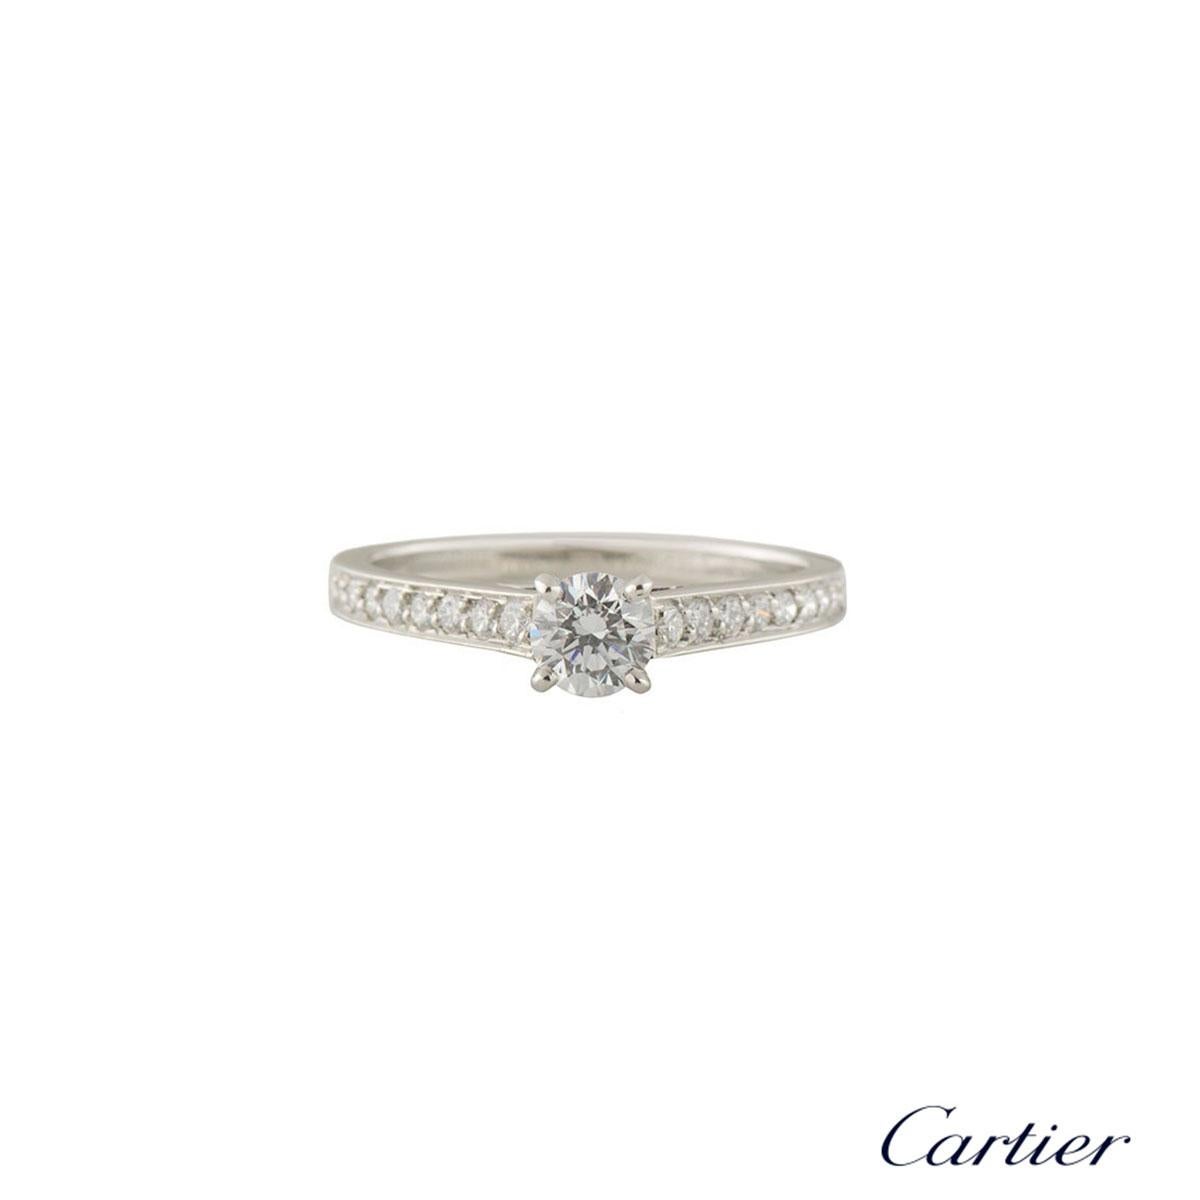 A beautiful Cartier diamond ring in platinum from the 1895 collection N4164647. The ring comprises of a round brilliant cut diamond in a claw setting with a total weight of approximately 0.35ct, G colour and VVS clarity. The ring features 10 round